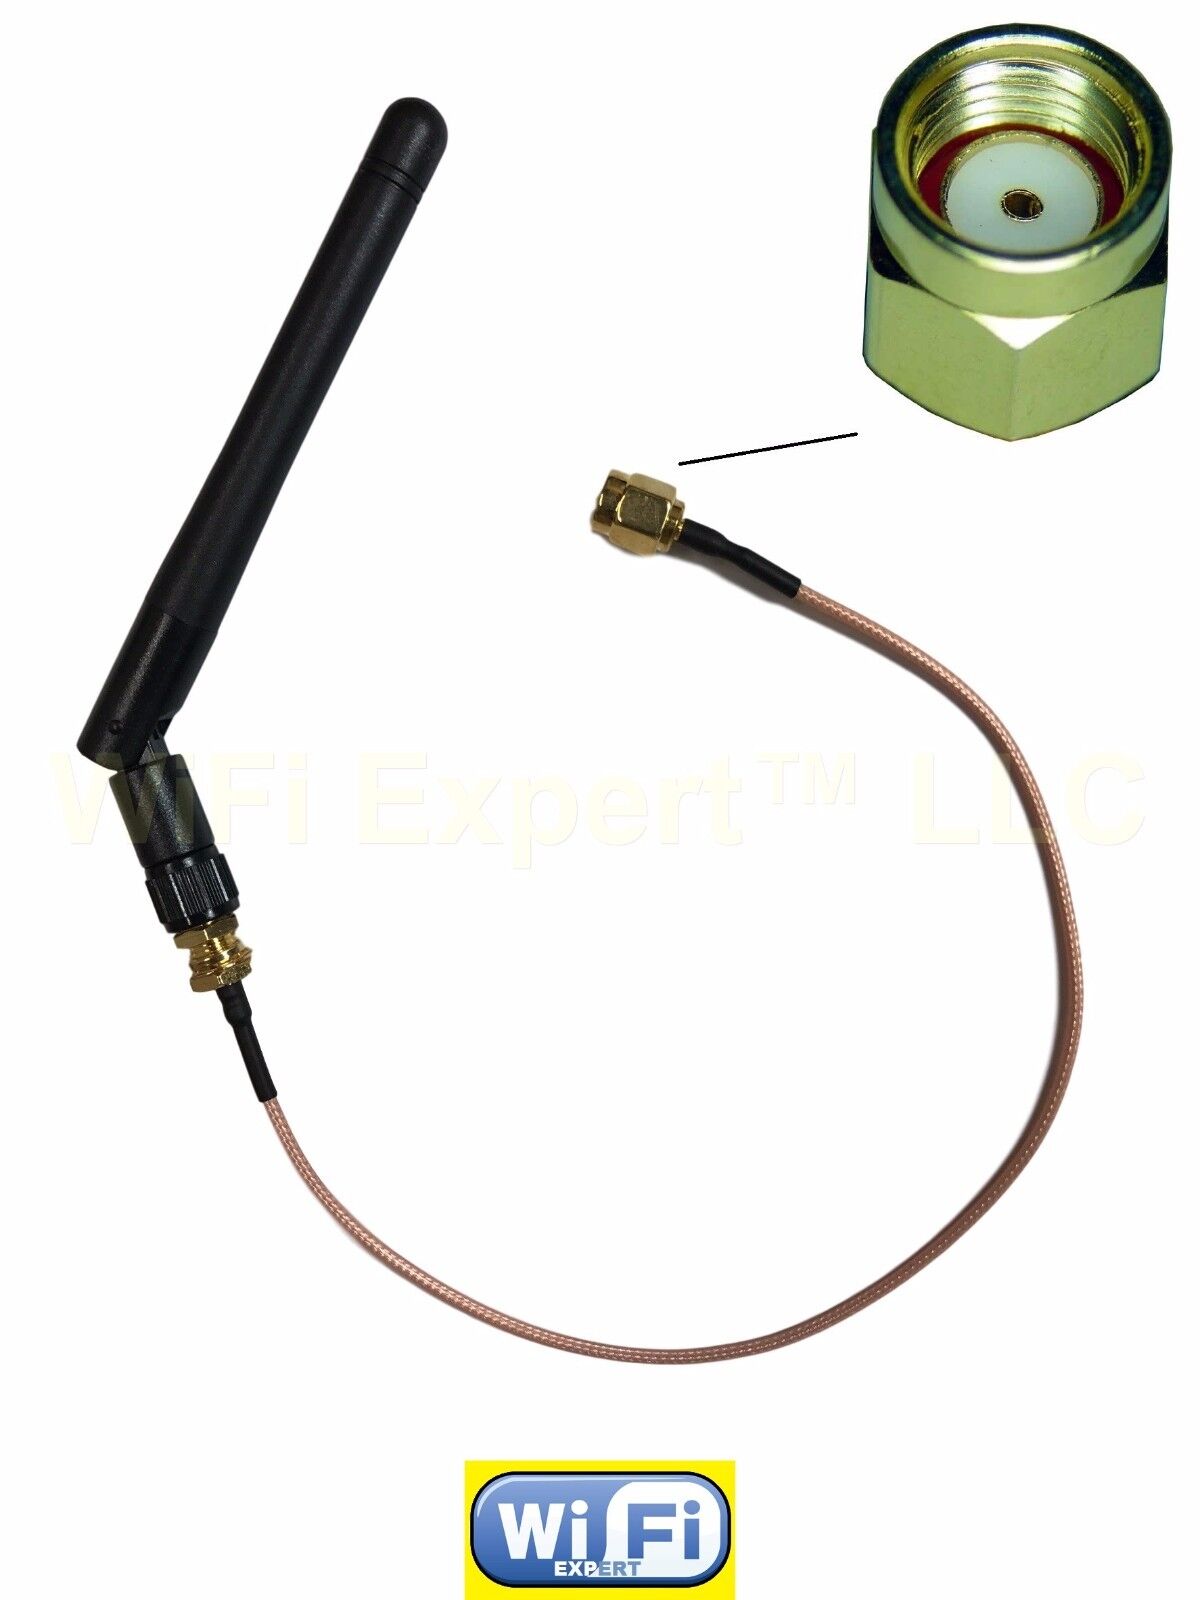 2dBi WiFi Antenna 2.4ghz / 5.8ghz and 10 INCH RP-SMA Extension Cable RG178 USA